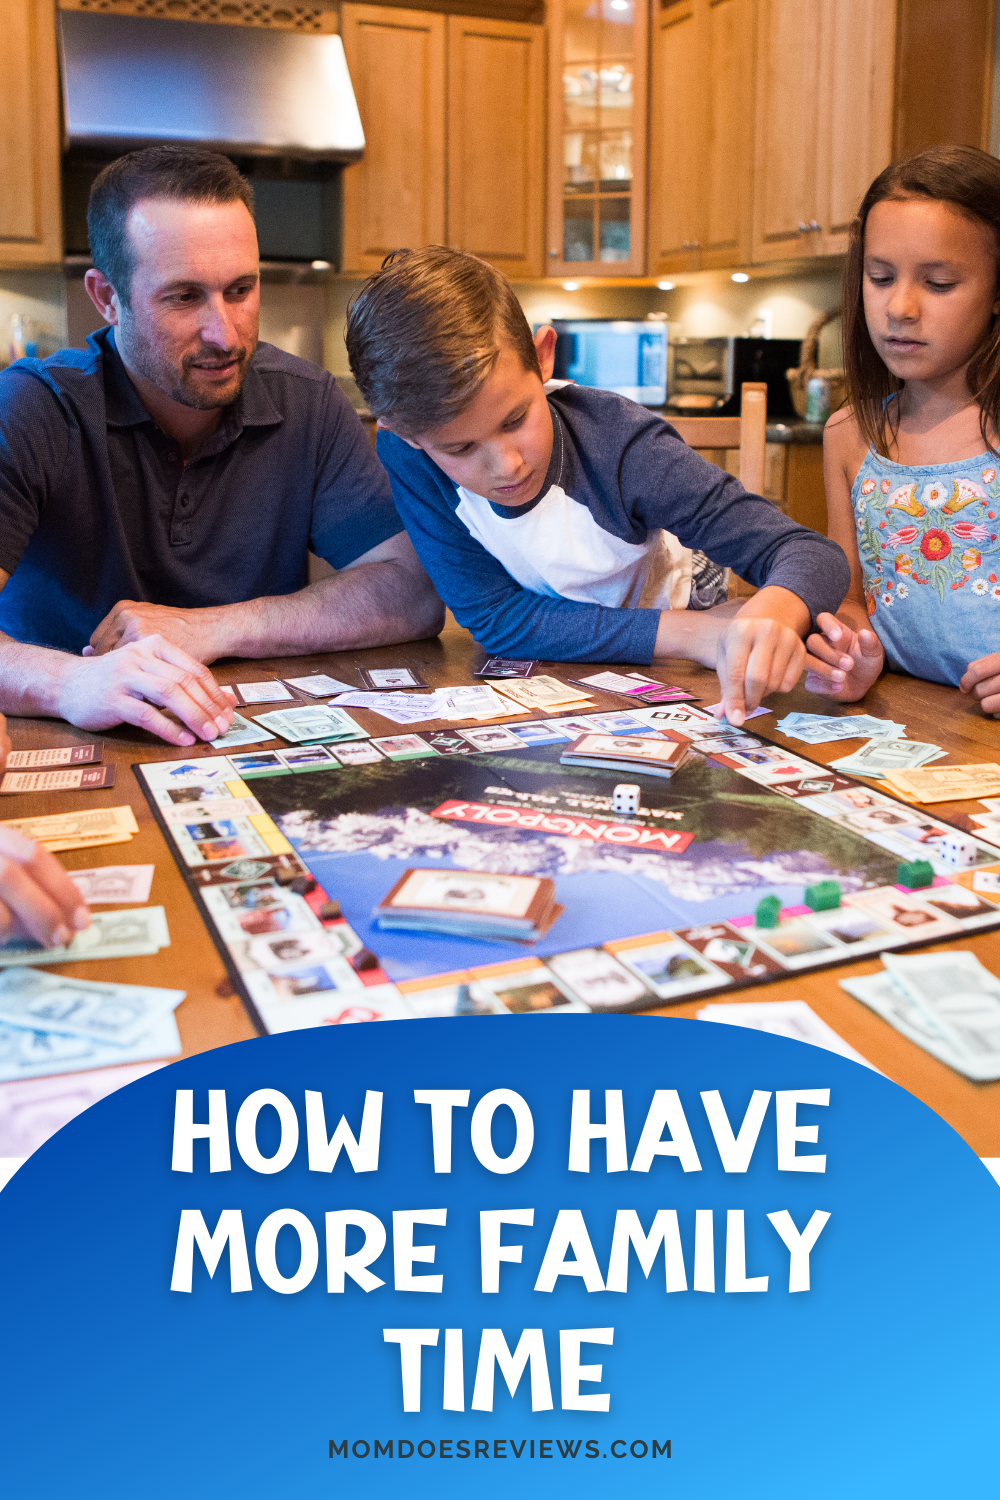 4 Ways To Spend More Time Together As A Family